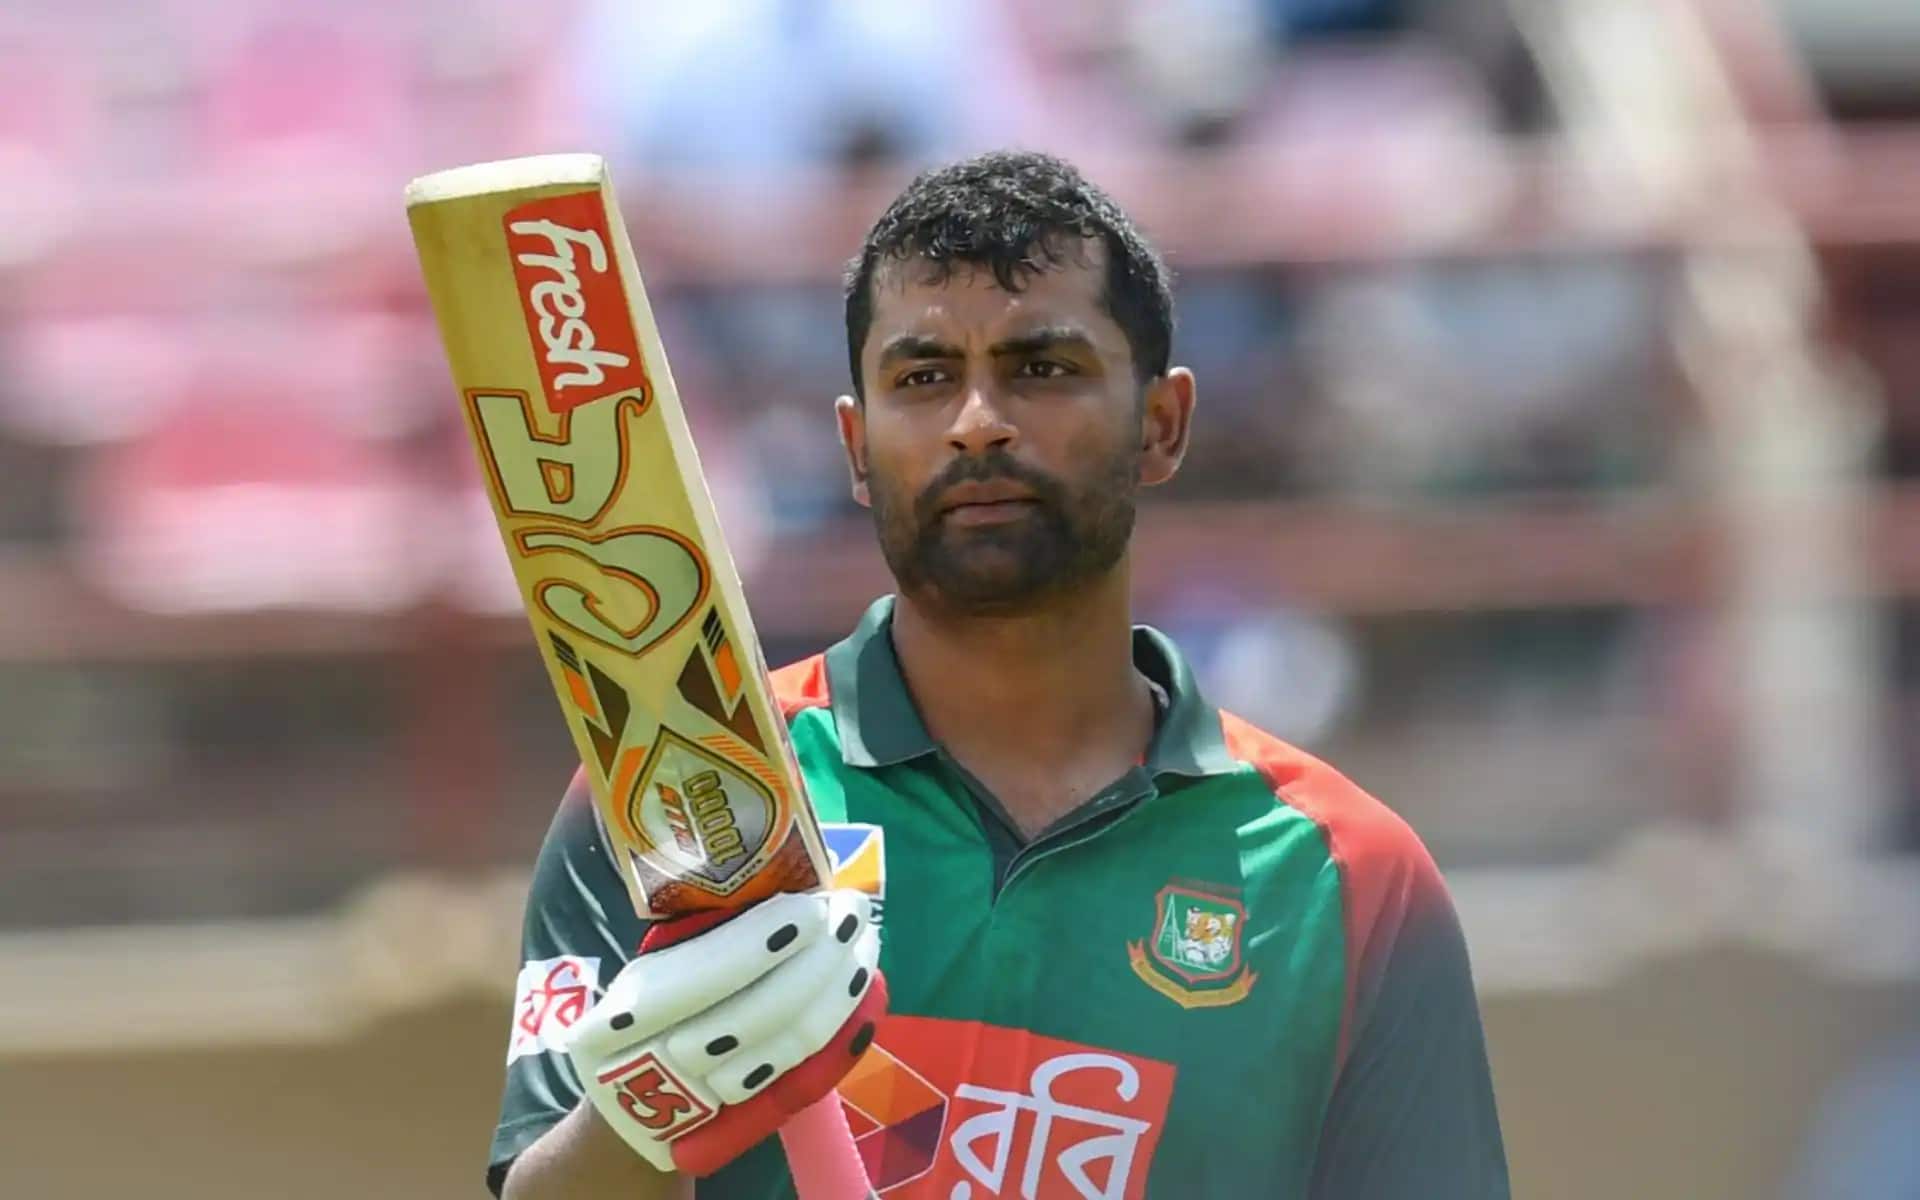 Tamim last played for Bangladesh in September